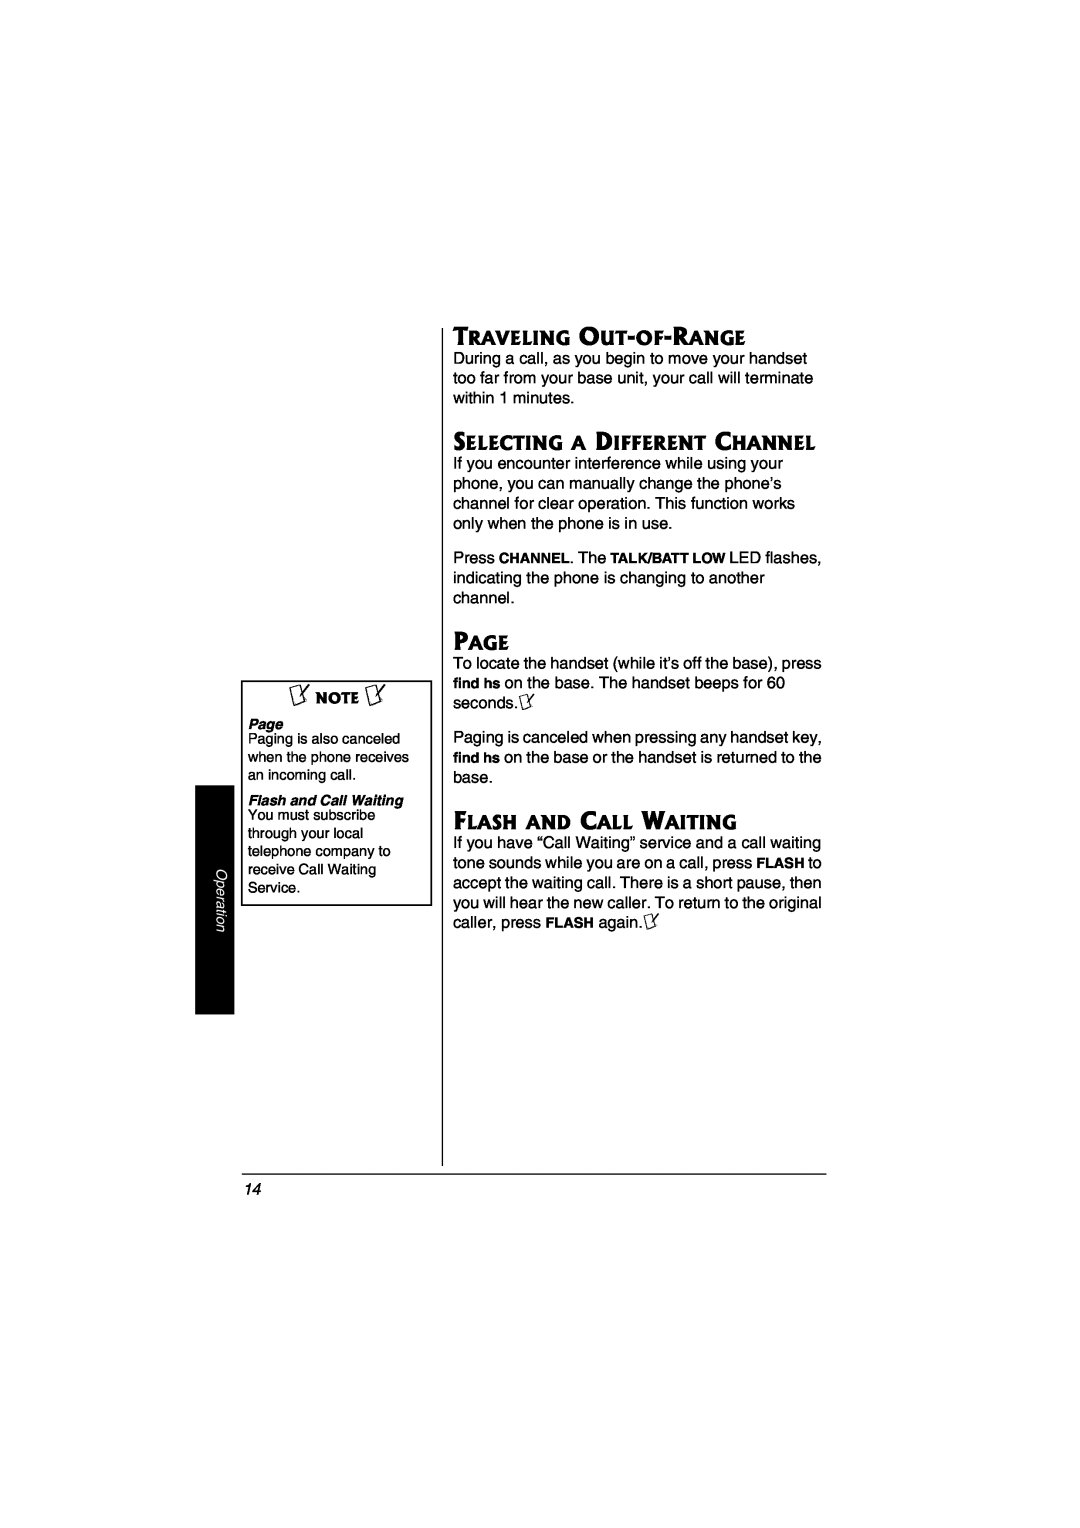 Radio Shack 43-3823 owner manual Traveling Out-Of-Range, Selecting A Different Channel, Page, Flash And Call Waiting 